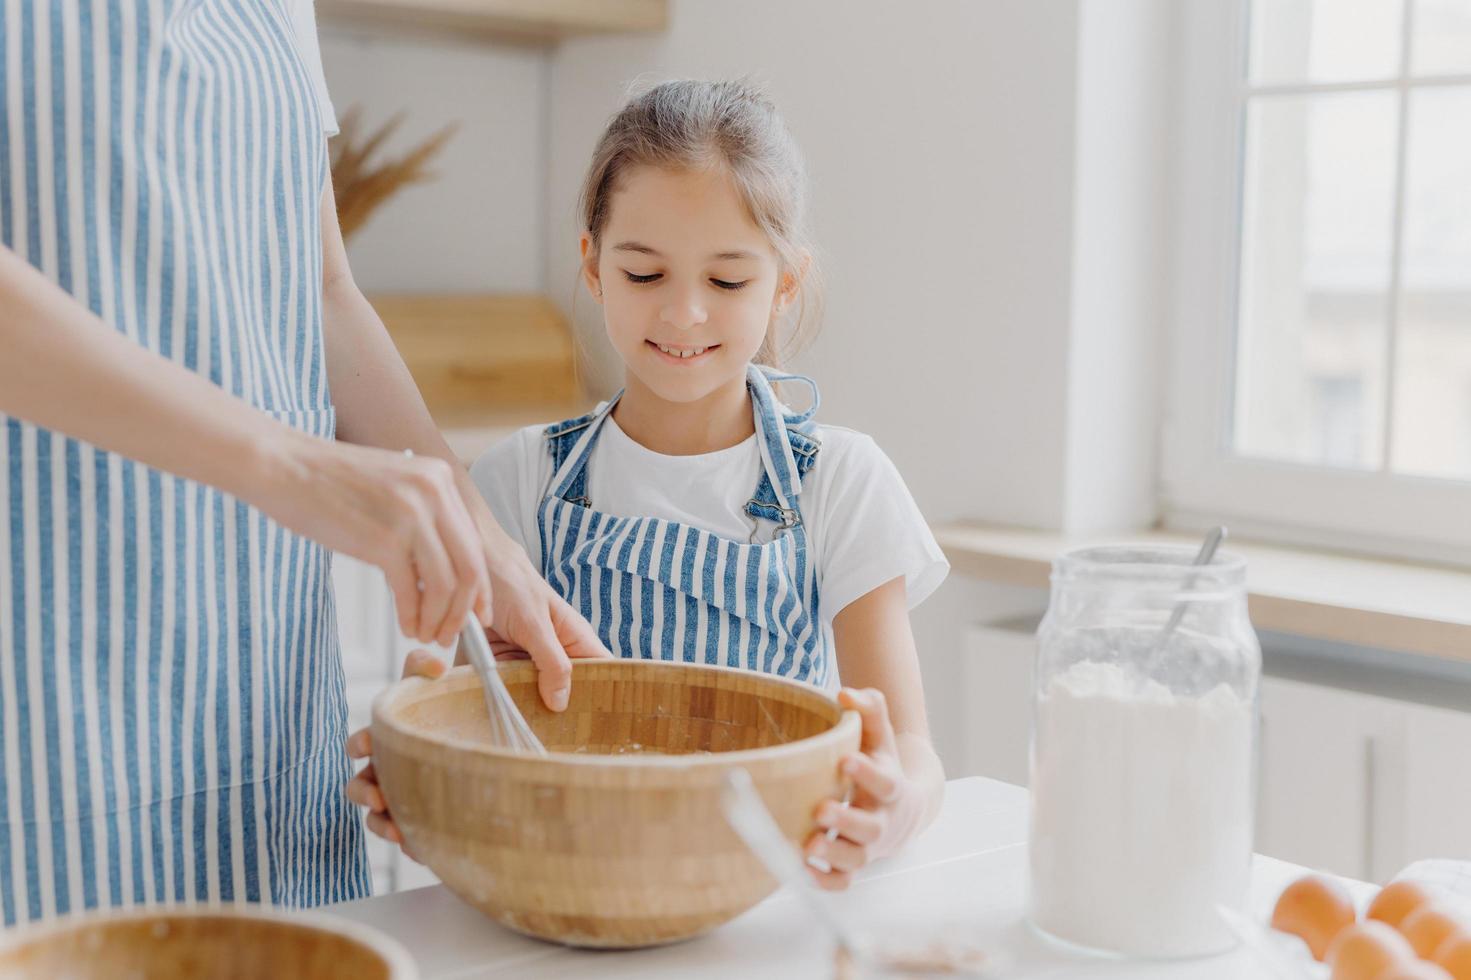 Curious small female helper looks attentively how mother cooks, helps to whisk ingredients, wears white t shirt and striped apron, prepare tasty cake together, like baking something delicious photo